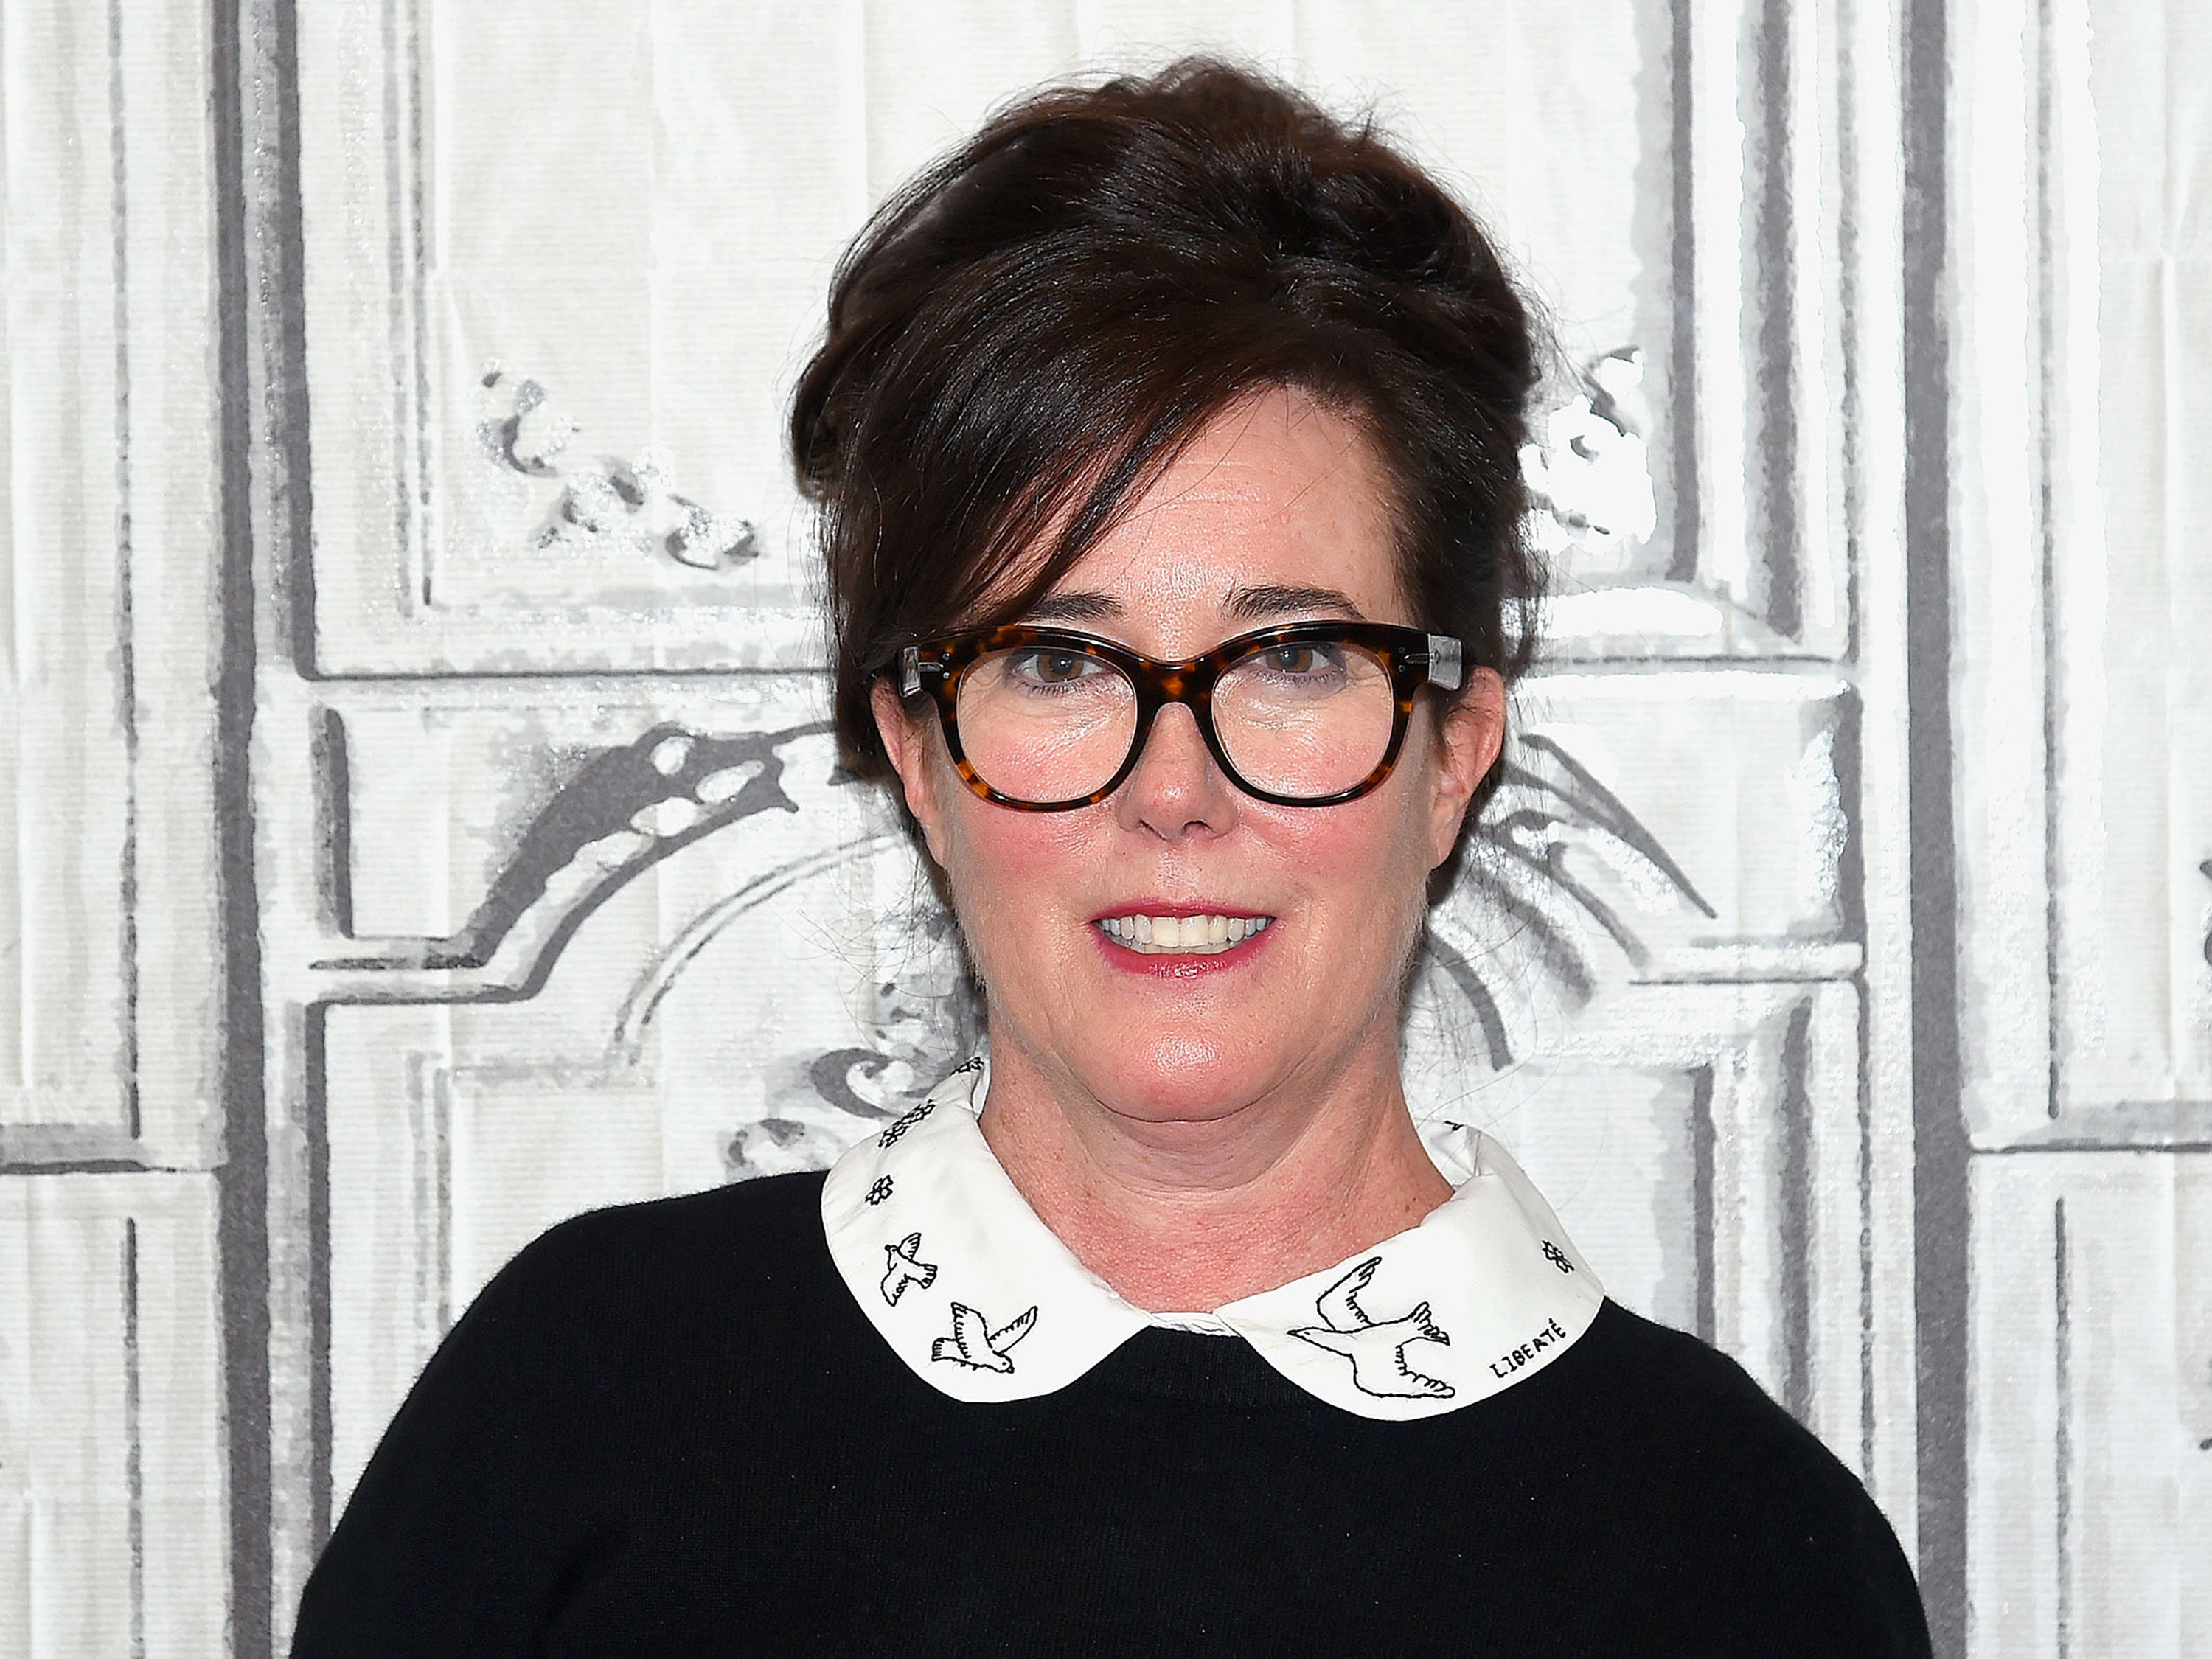 kate spade letter to daughter leaked